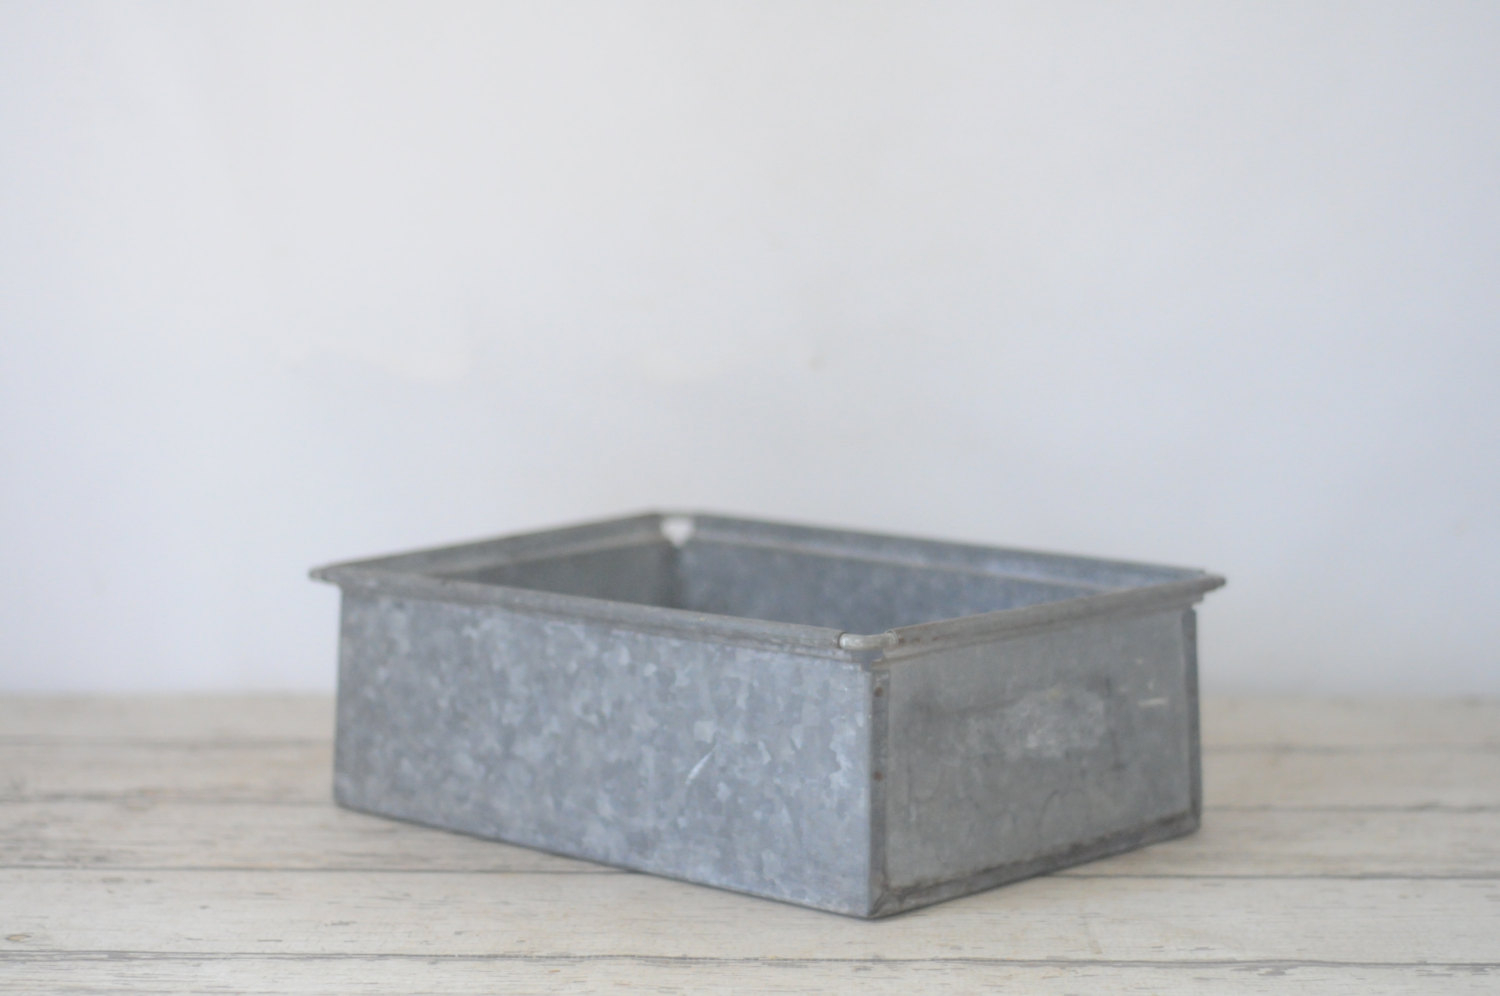 Vintage Industrial Metal Storage Bin Box Tote Drawer Etsy intended for size 1500 X 996